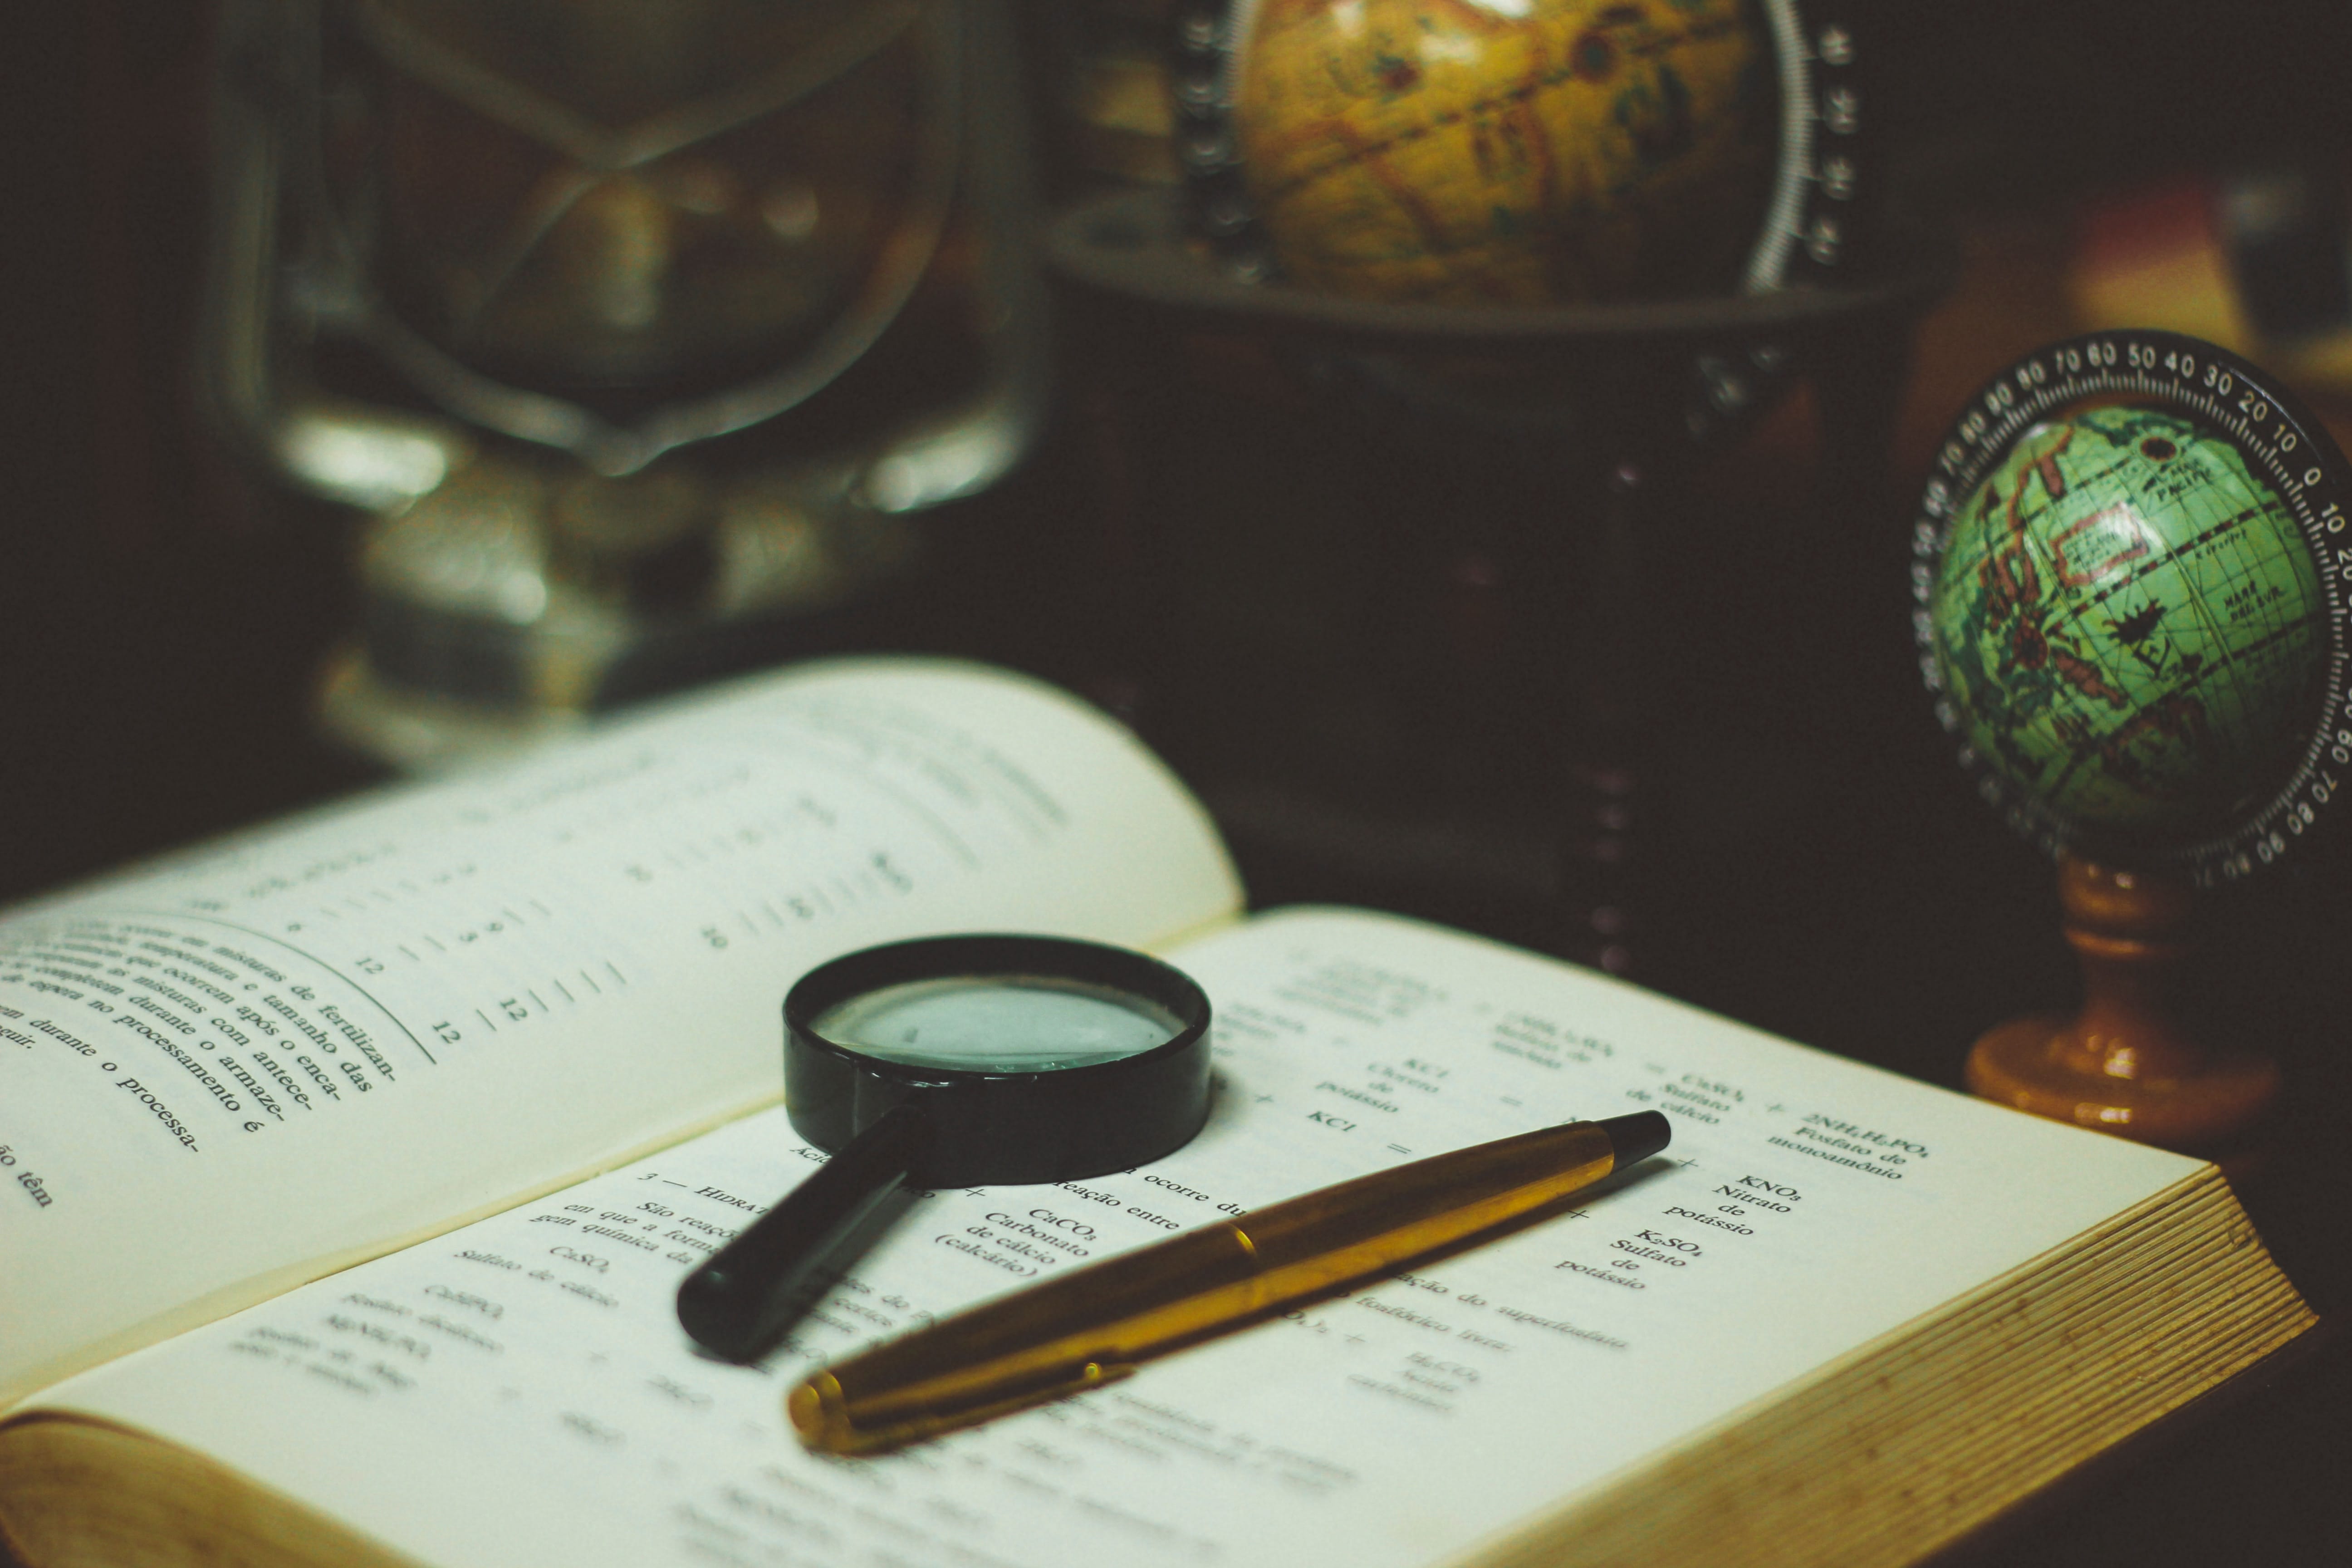 Magnifying glass and pen on book; image by João Silas, via Unsplash.com.